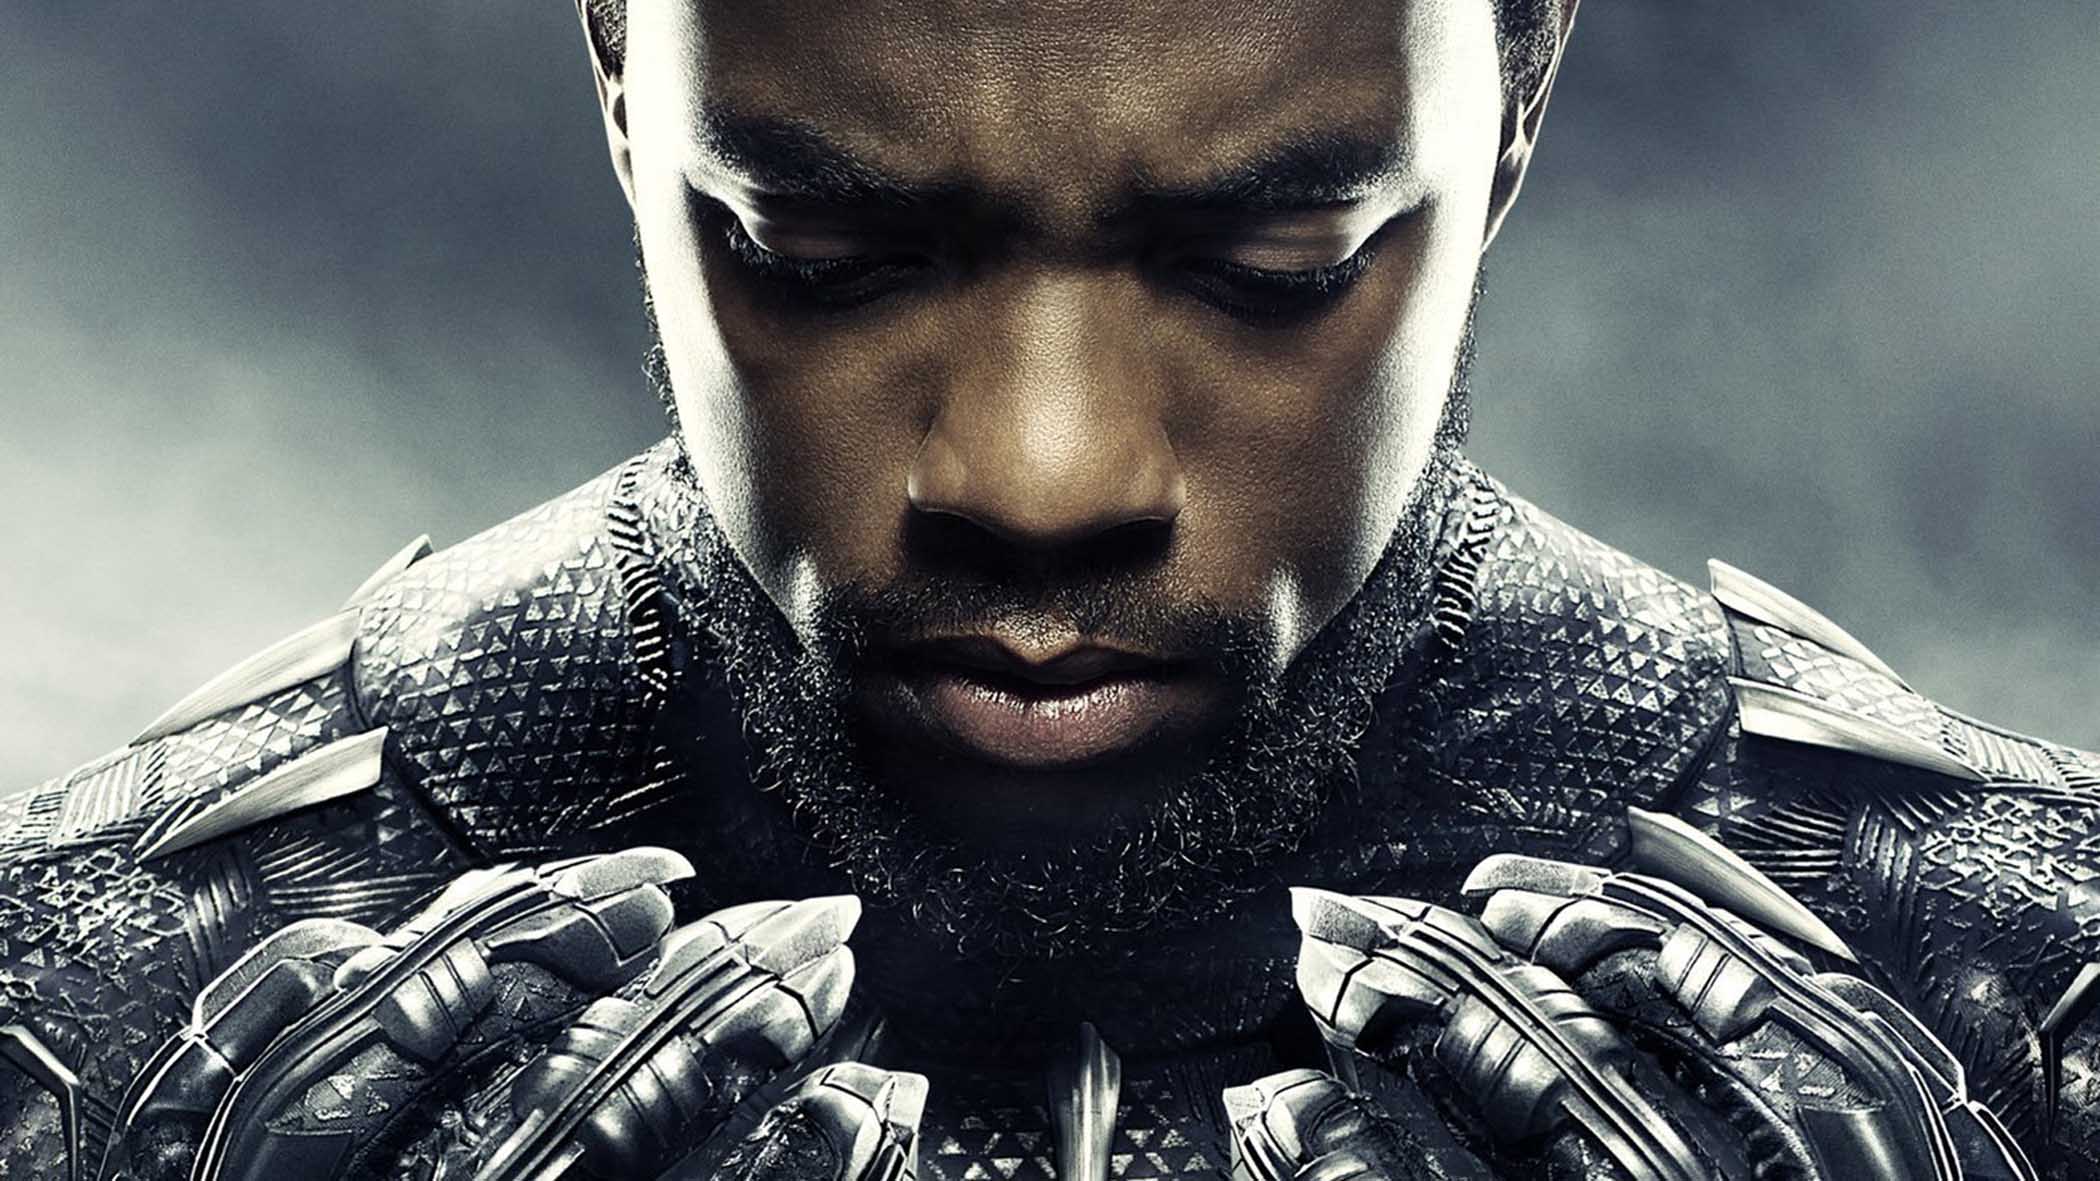 'Black Panther' caused audiences to obsess over the Wakanda dialect. Let's tour through the movie lingos and let our linguistic freak flags fly.